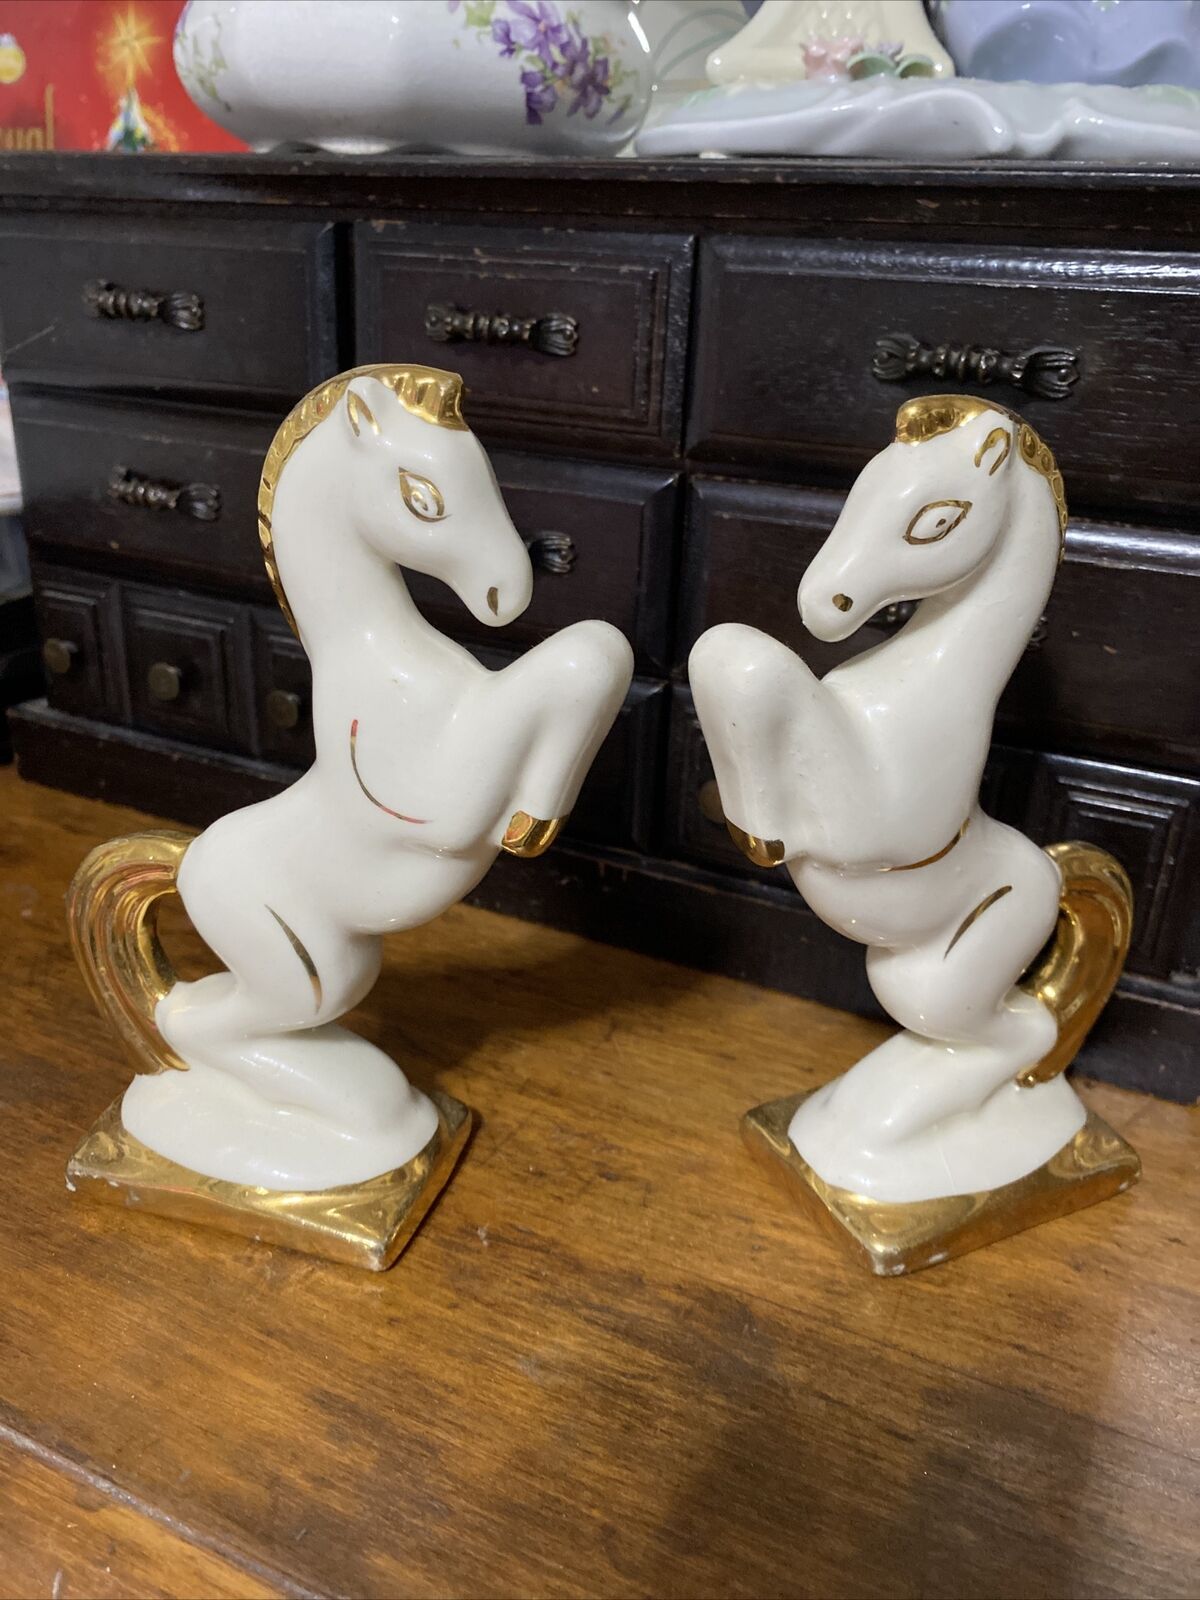 Art Deco Rearing Horse Ceramic Statue White Gold Crackle Glaze 6 3/8” tall. Pair